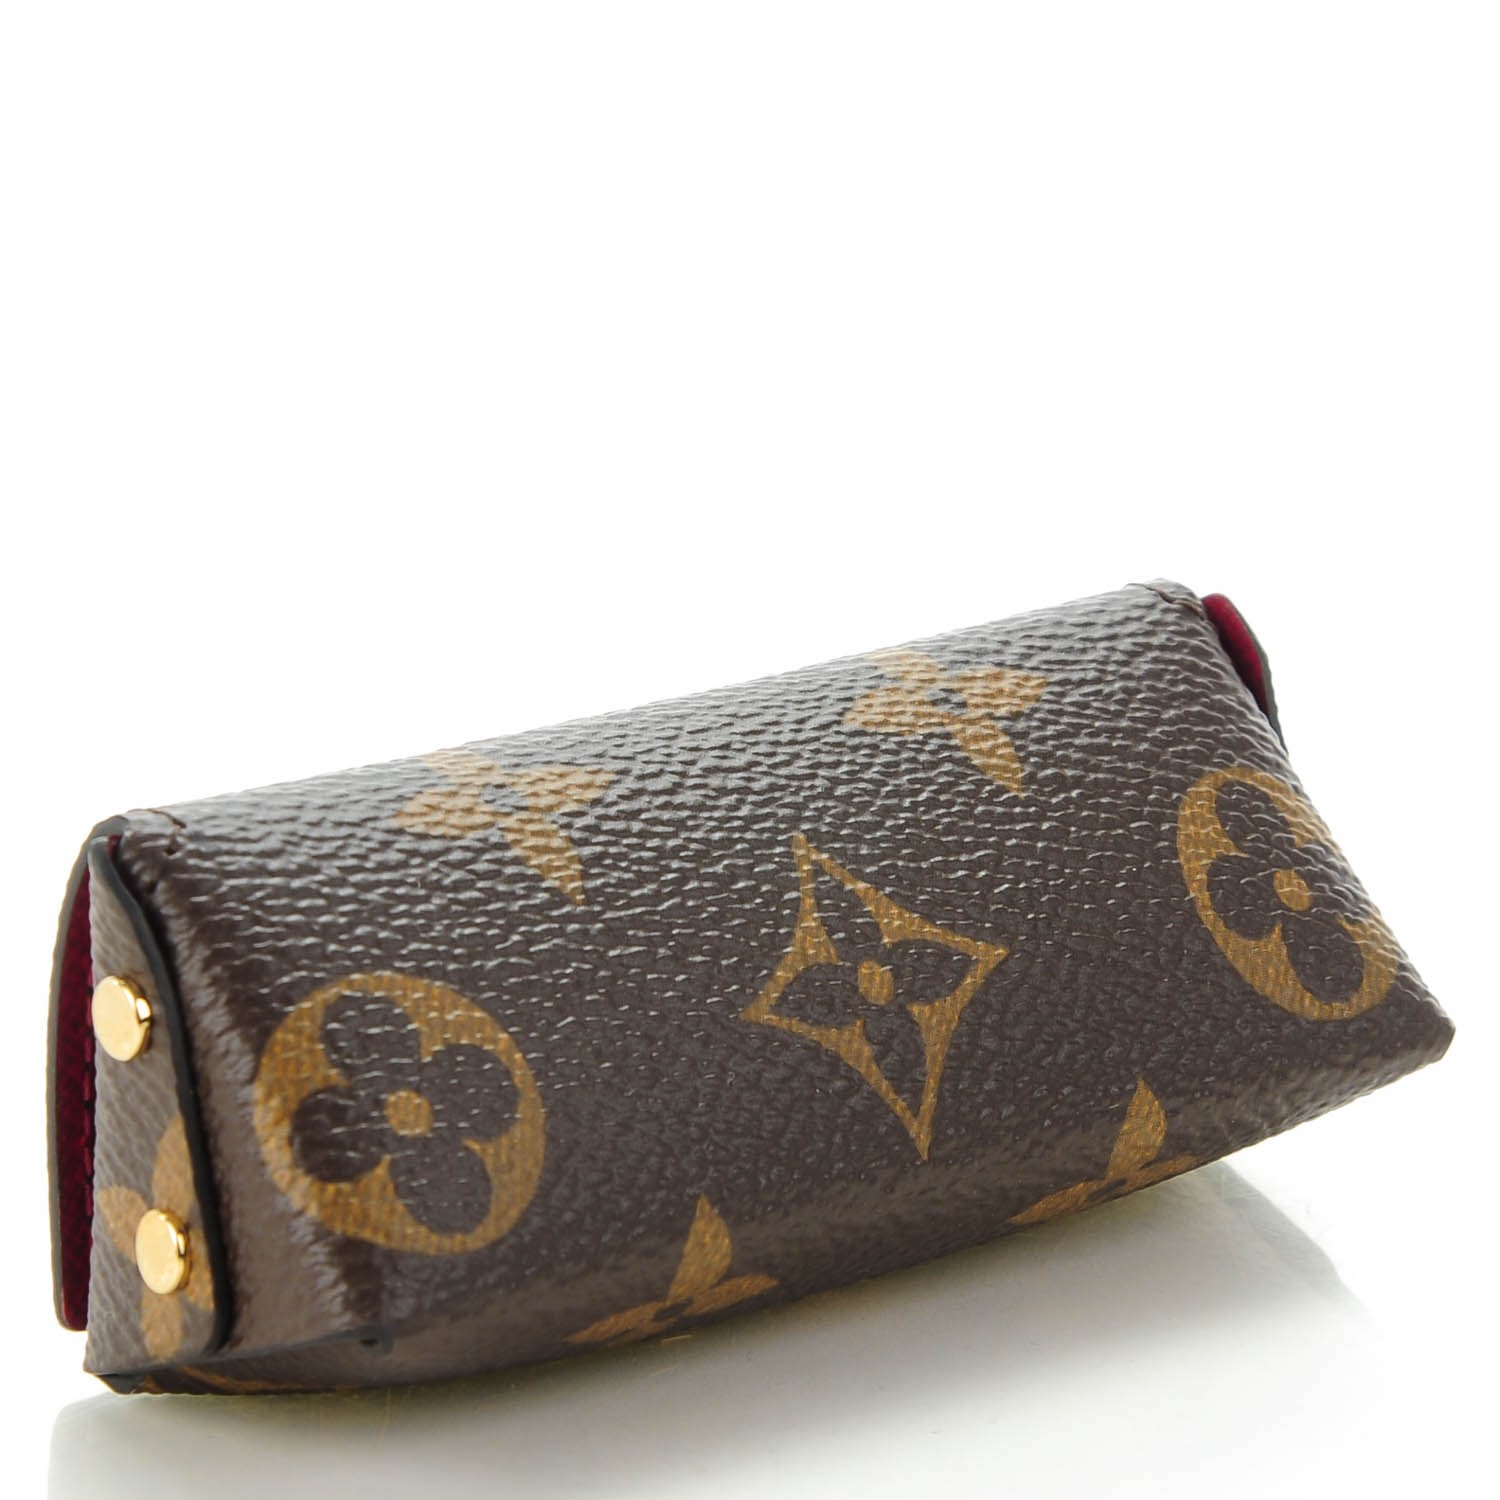 Will You Buy A Louis Vuitton Lipstick Case That Costs A cool $1.4K? - SHOUTS